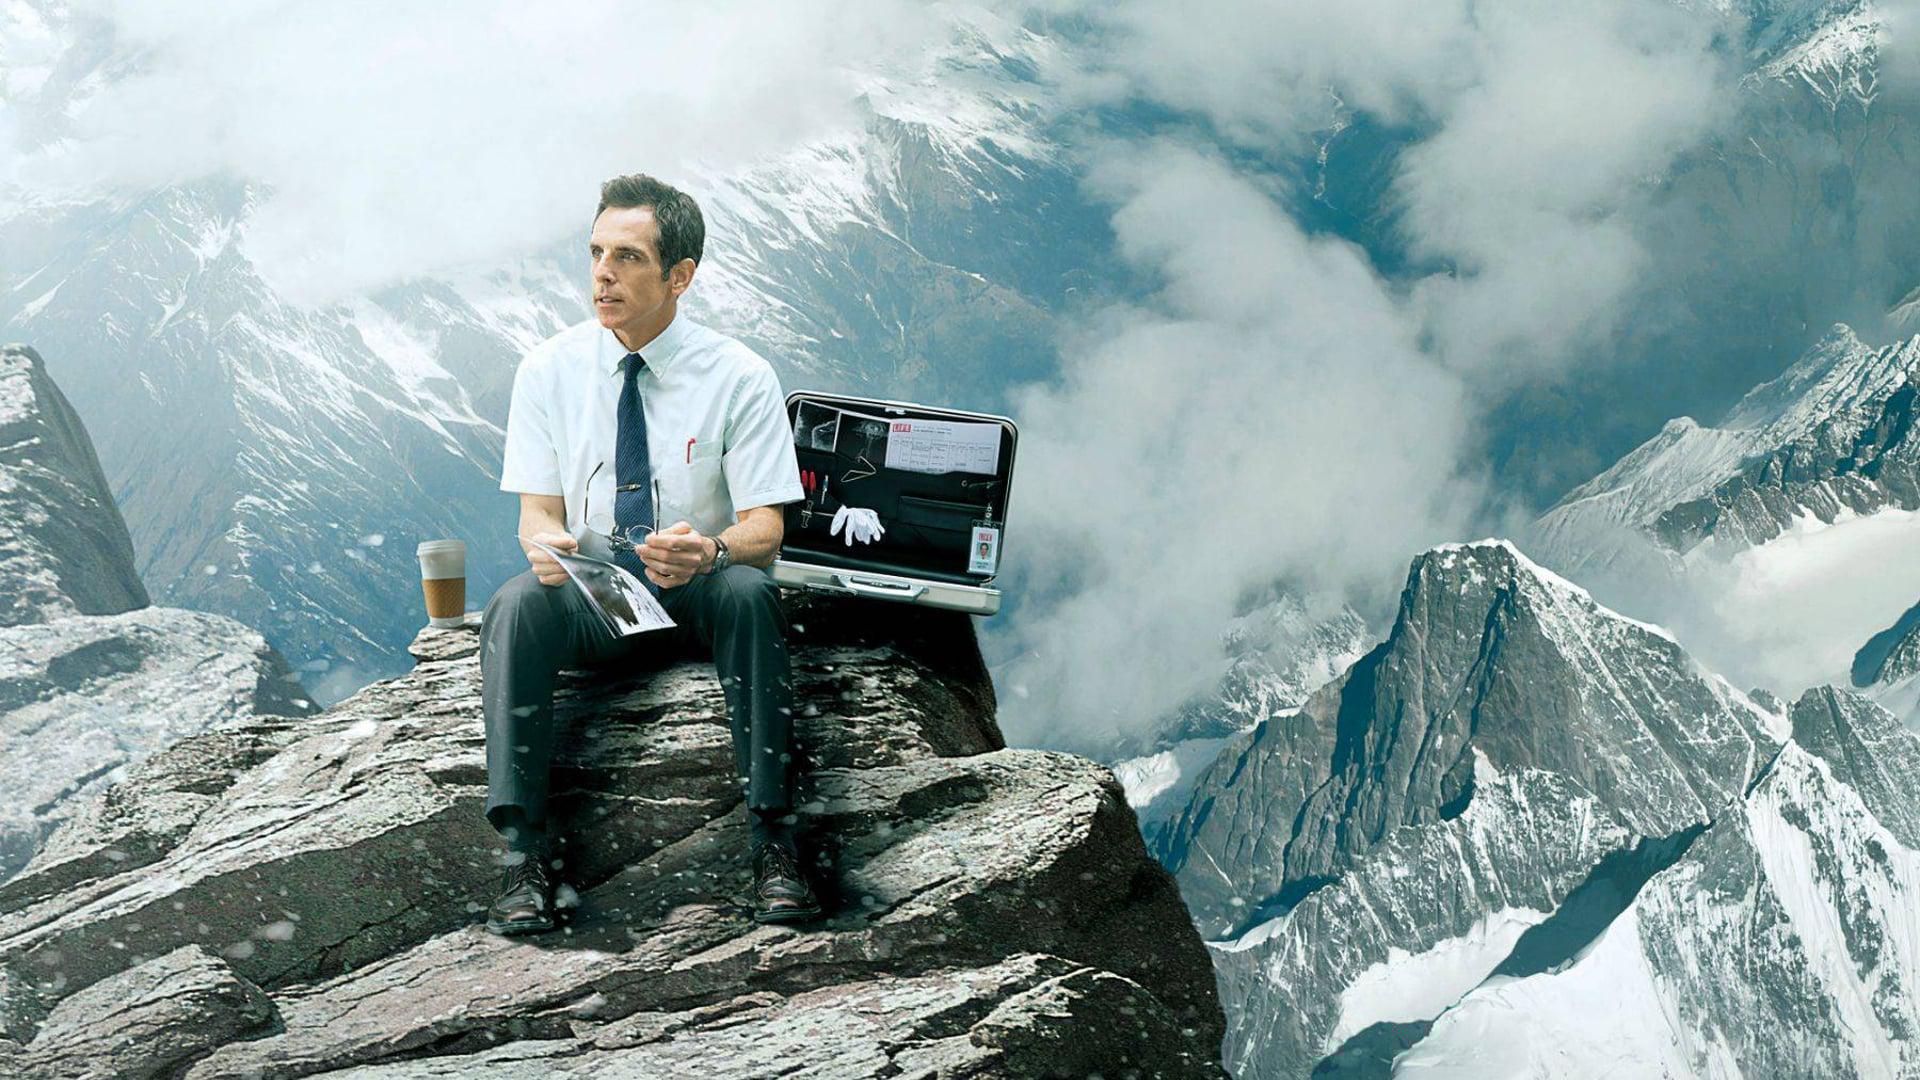 Backdrop Image for The Secret Life of Walter Mitty